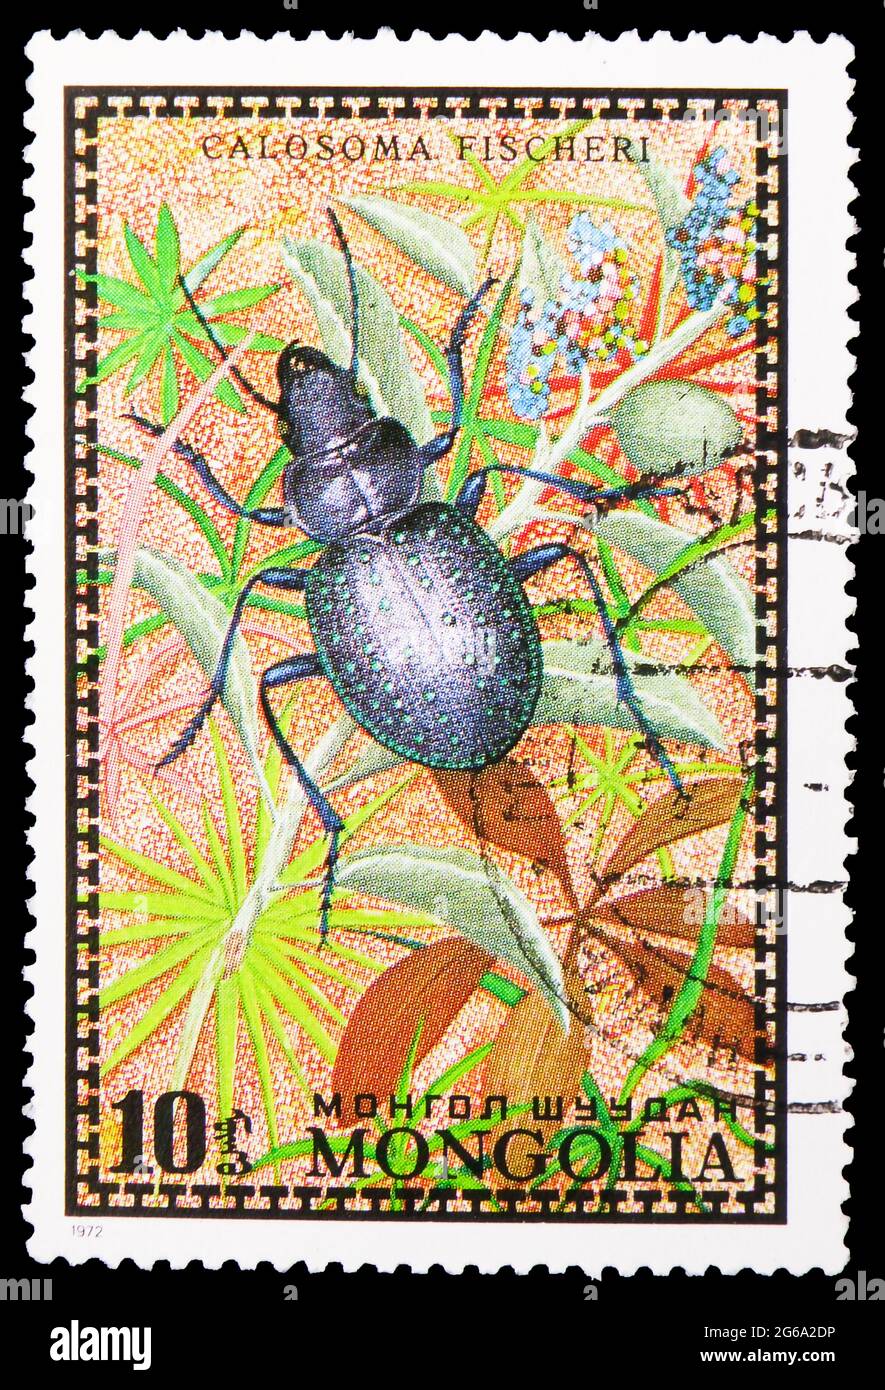 MOSCOW, RUSSIA - APRIL 18, 2020: Postage stamp printed in Mongolia shows Fischers Caterpillar Hunter (Calosoma fischeri), Bugs serie, circa 1972 Stock Photo